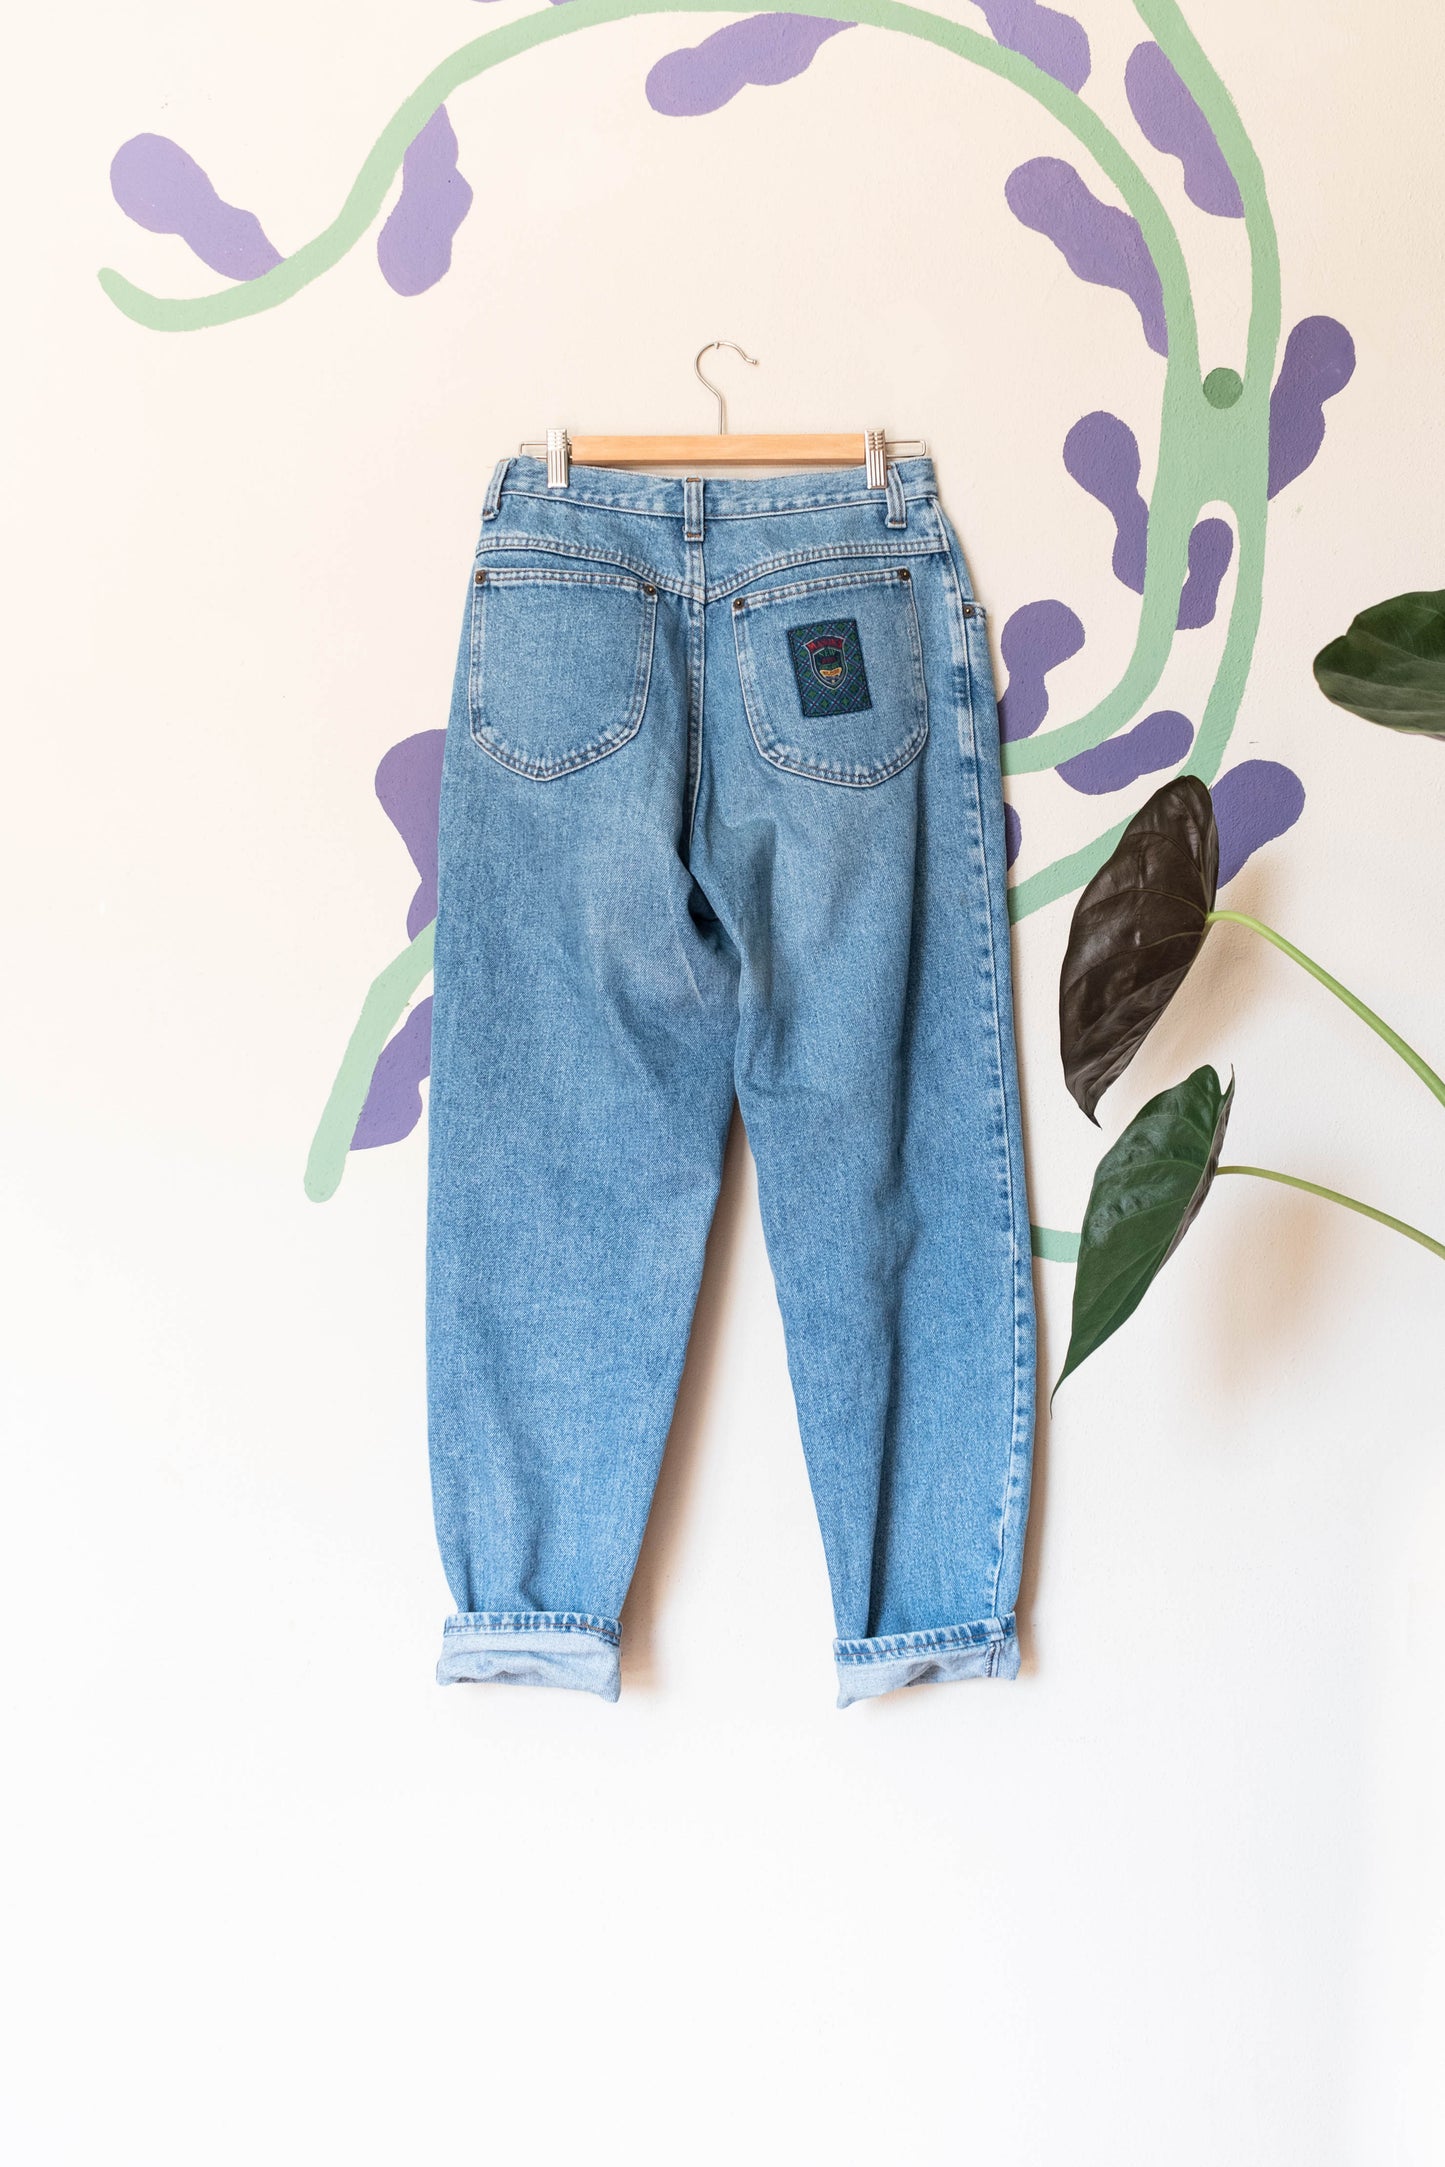 NEW IN! Momjeans